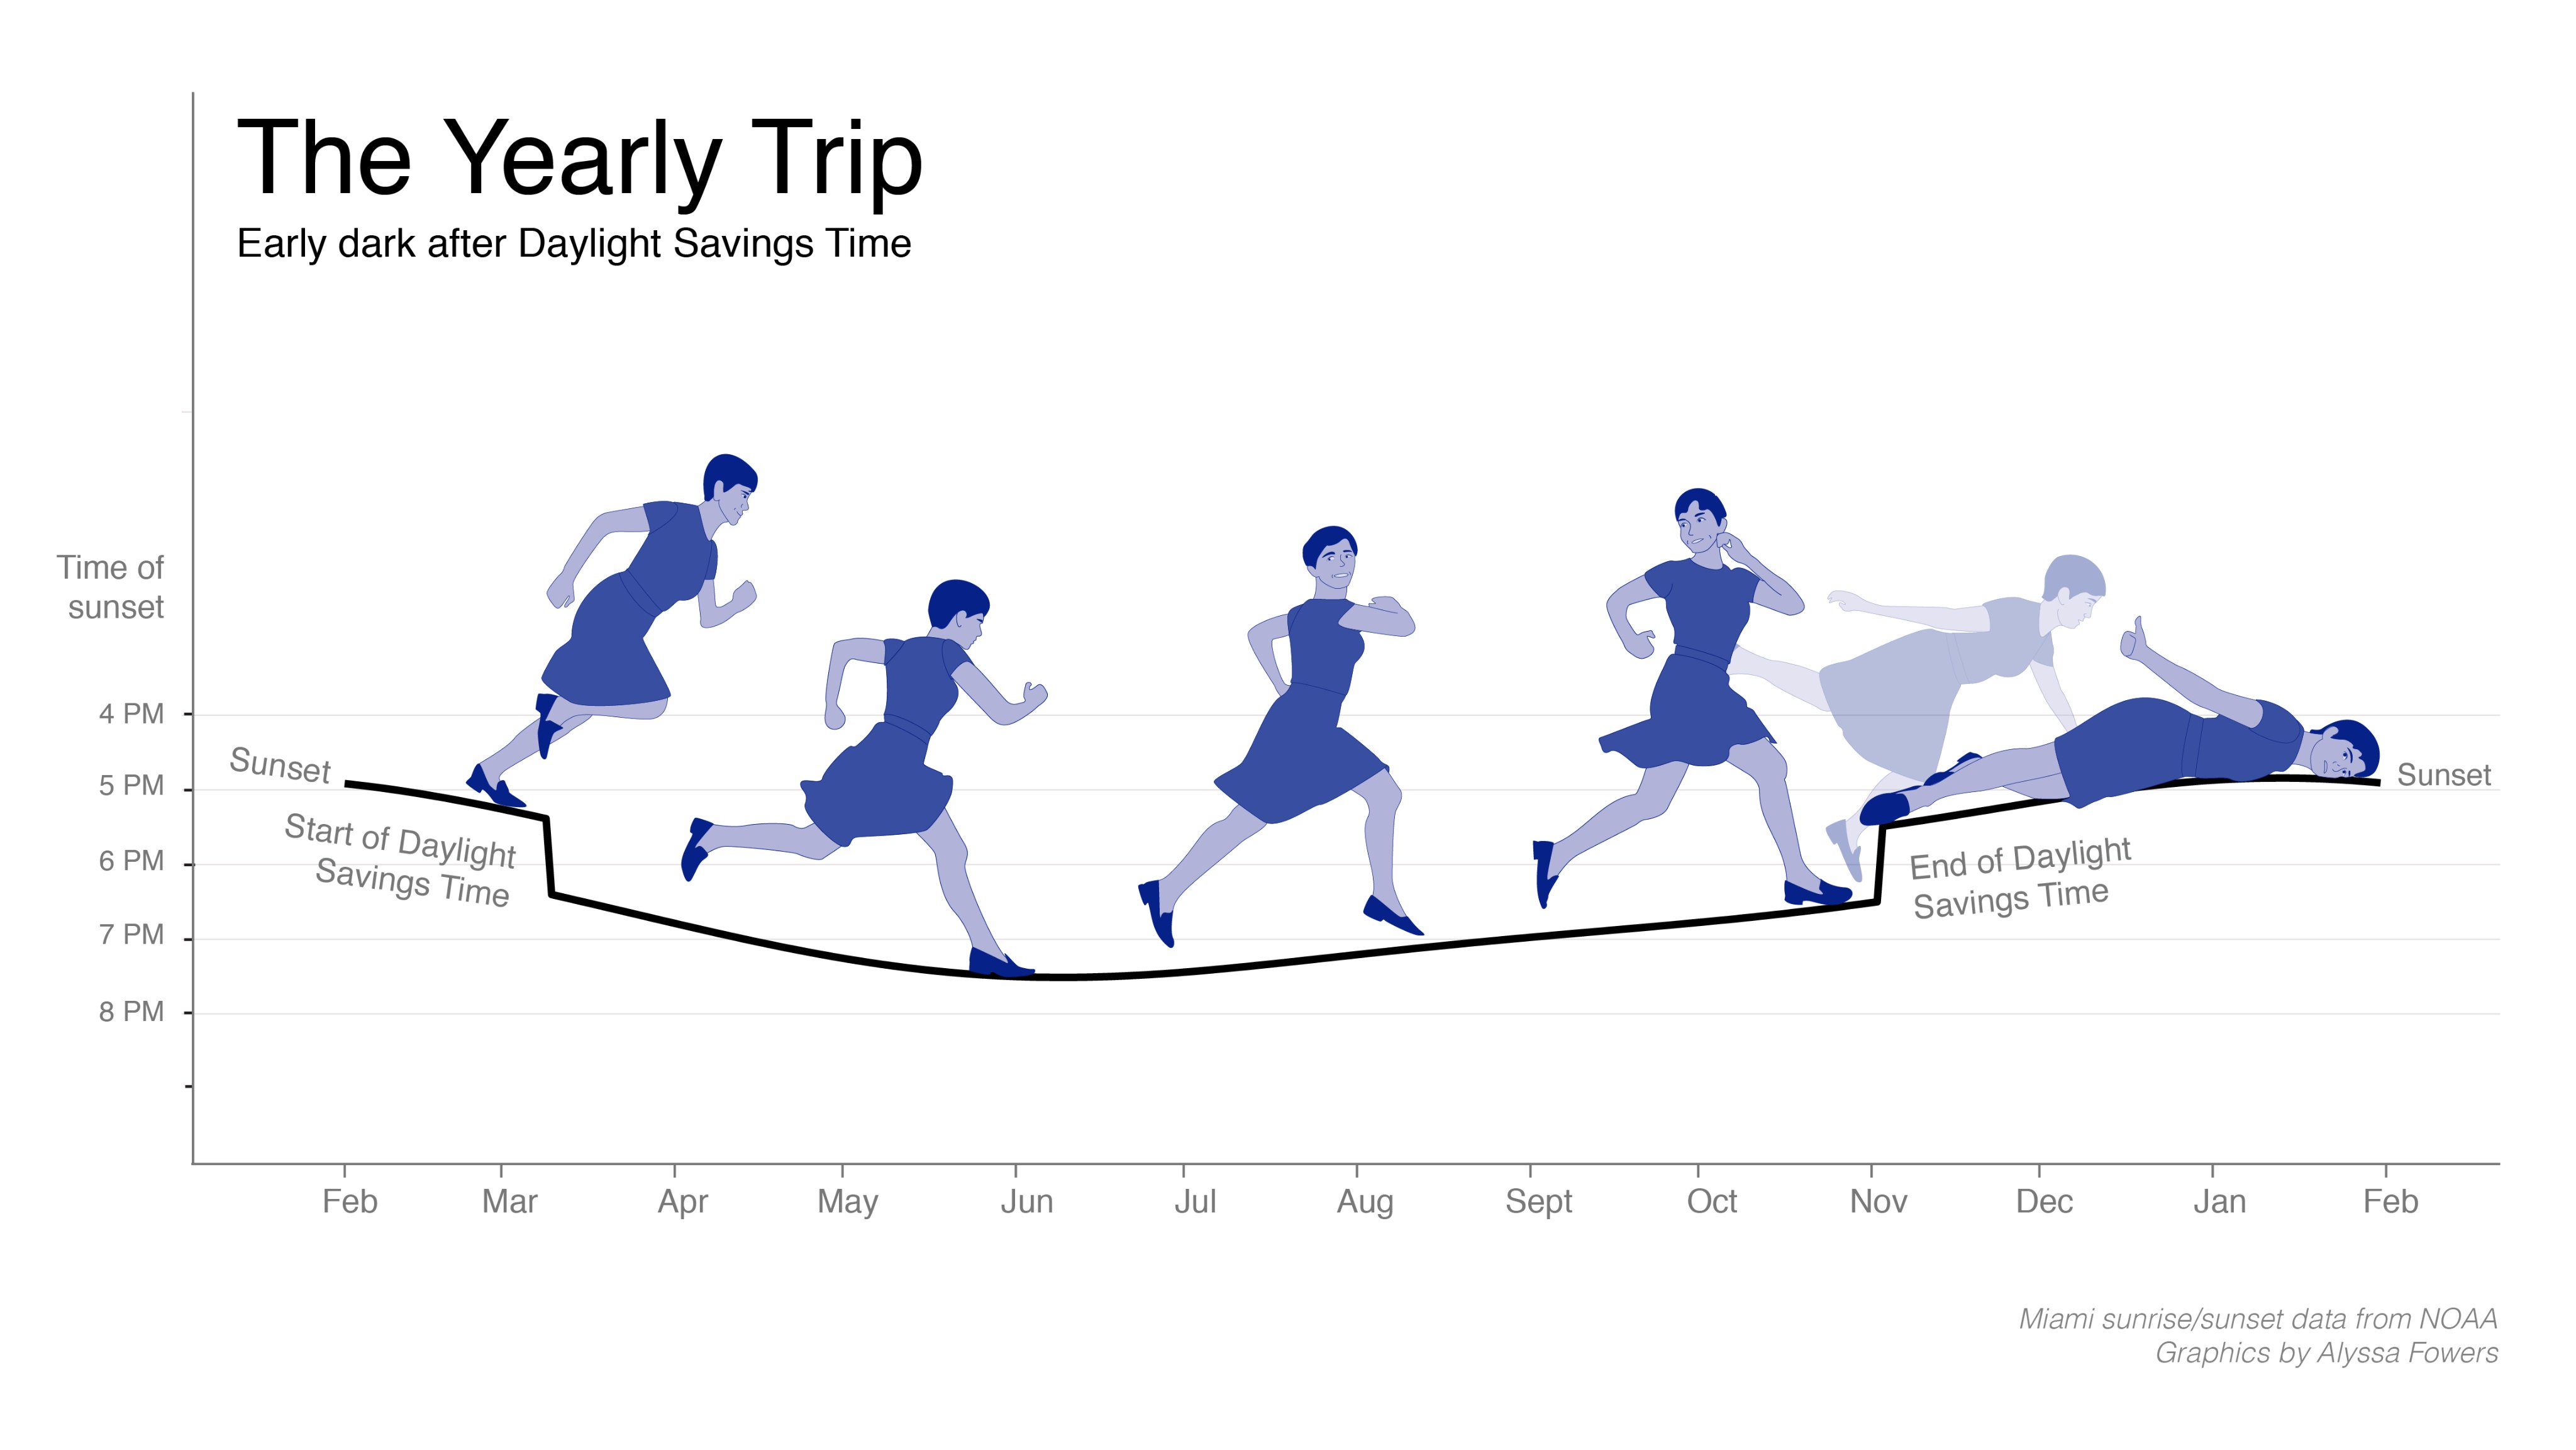 A cartoon titled 'The Yearly Trip' with subtitle 'Early dark after Daylight Savings Time', showing a women running over the line of a line chart. The y axis represents the time of sunset and the x axis runs over a year, from February to February the next year. The woman trips around November, at the end of Daylight Savings Time'